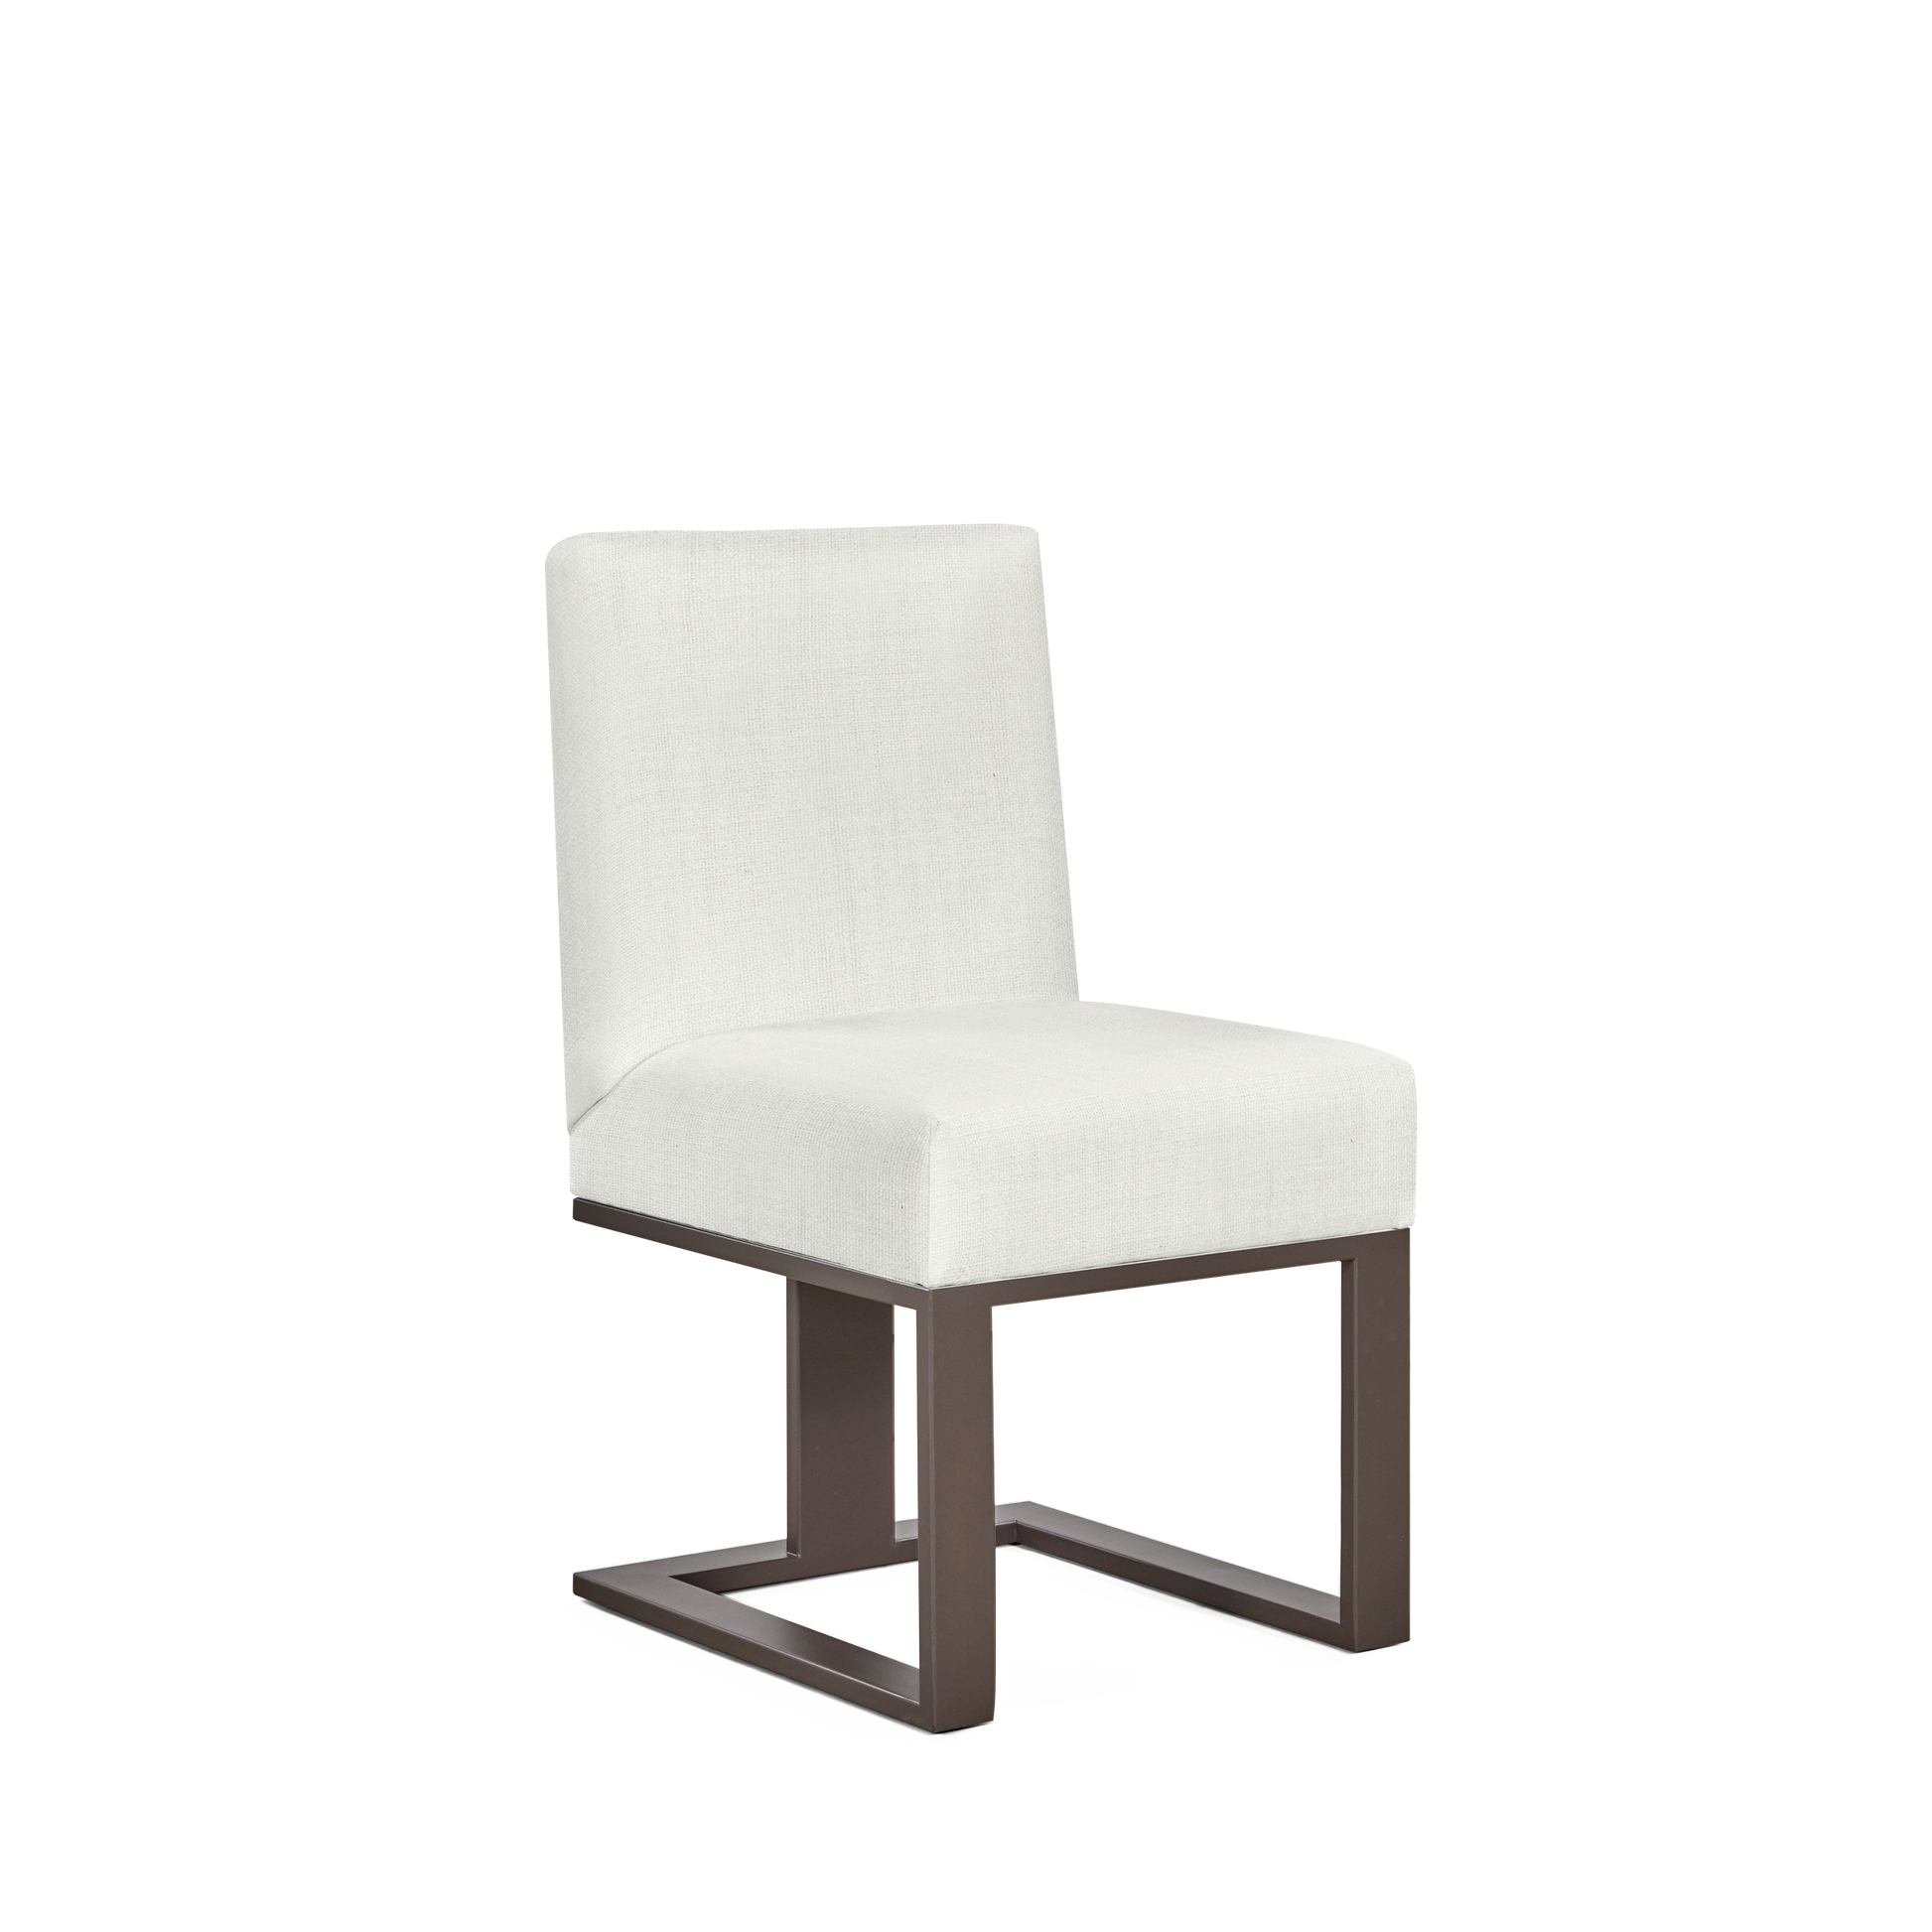 Len chair with white textile Rocco with moka wood legs 